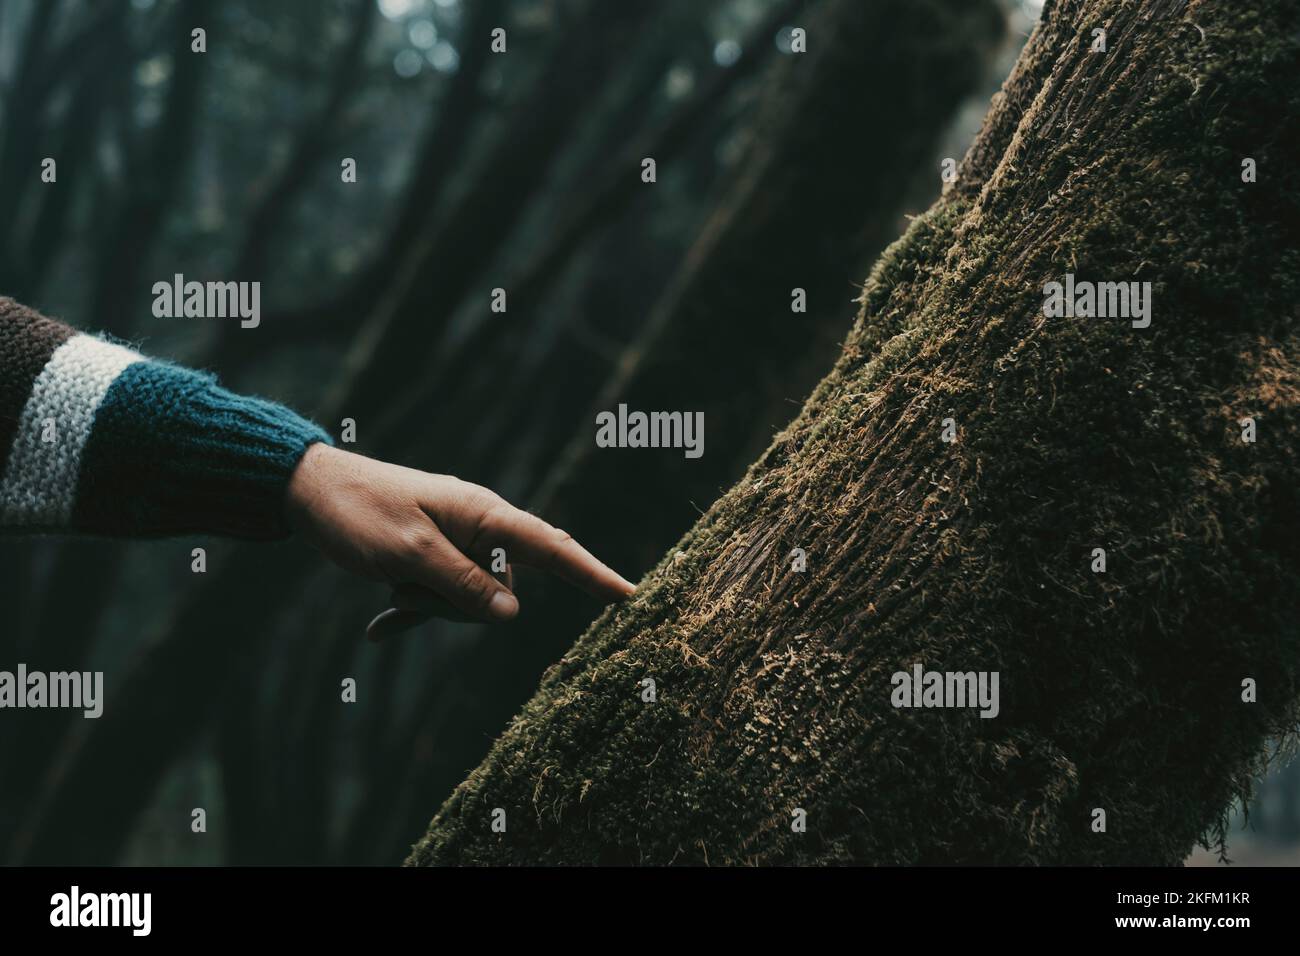 Close up of human man finger hand touching with care a green musk tree trunk in outdoor forest woods nature scenic place. People and nature respect lo Stock Photo